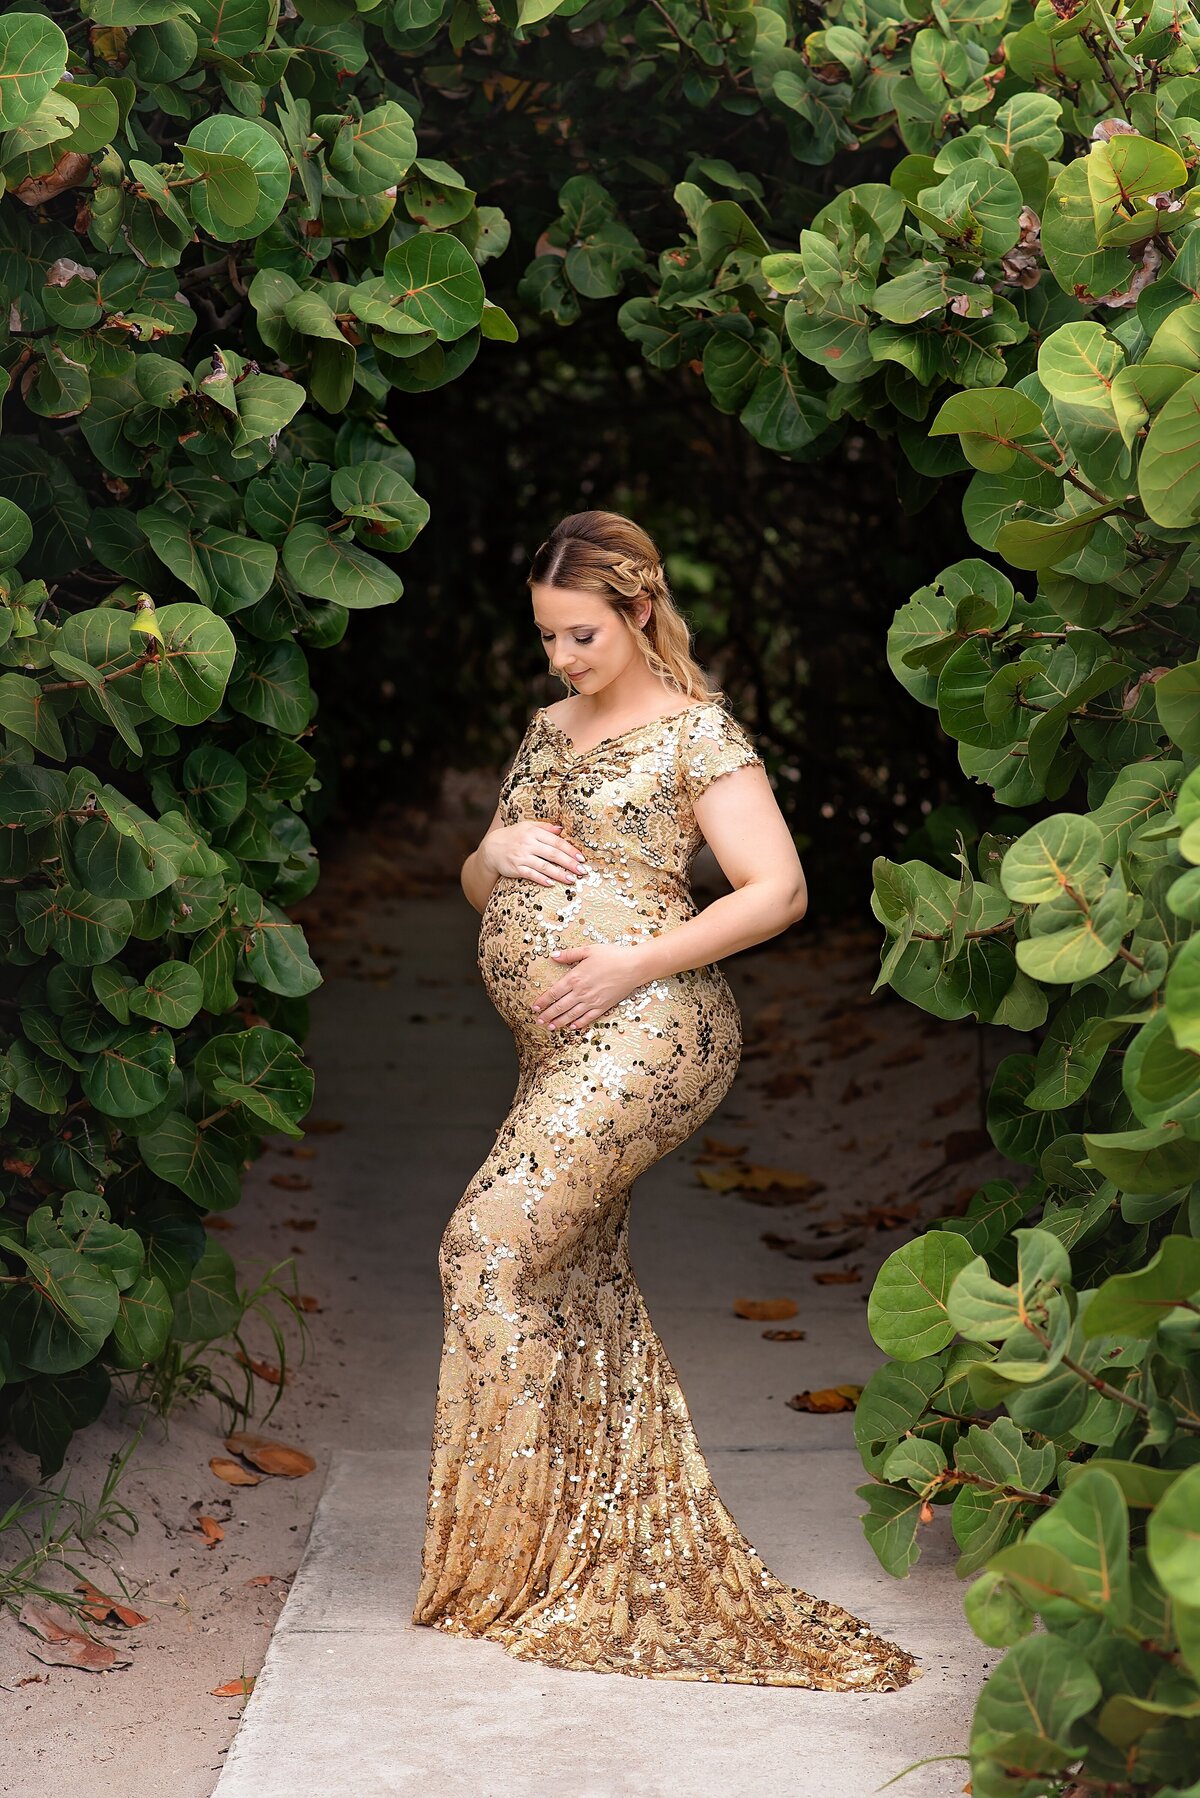 Jupiter outdoor maternity session at Coral Cove Beach with an elegant dress in a beautiful greenery arch.